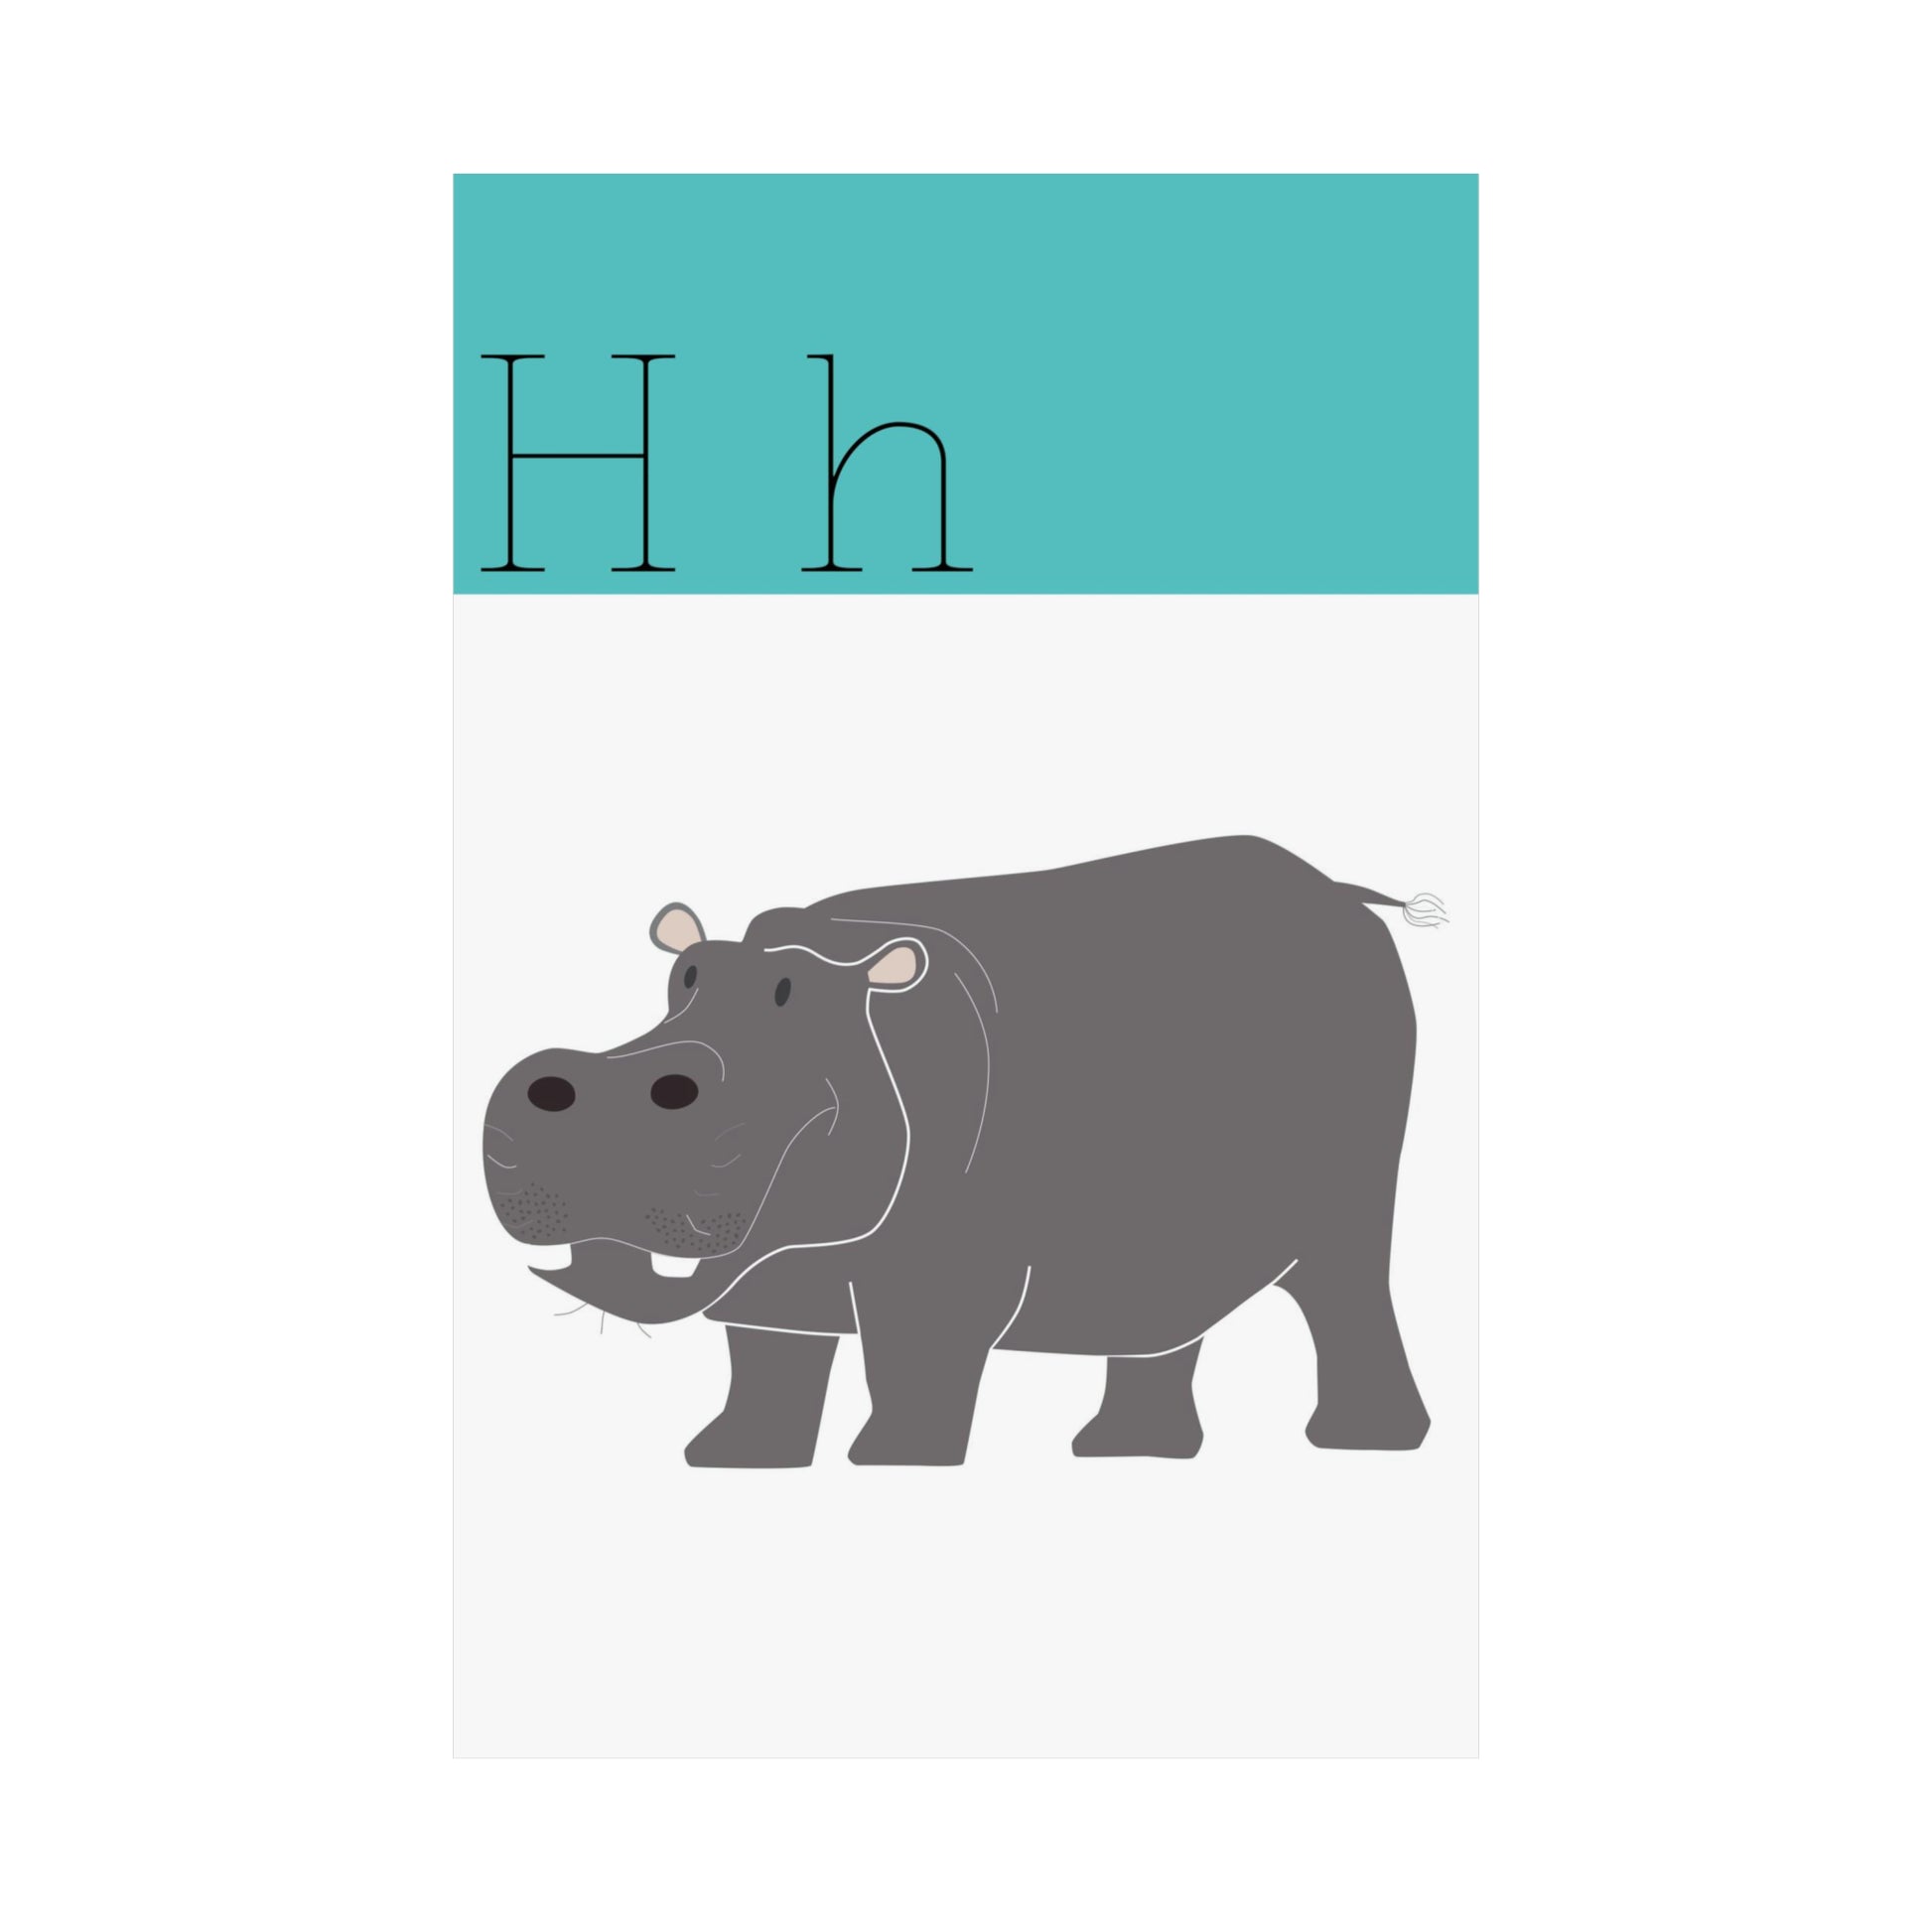 Hippo Poster in white background 